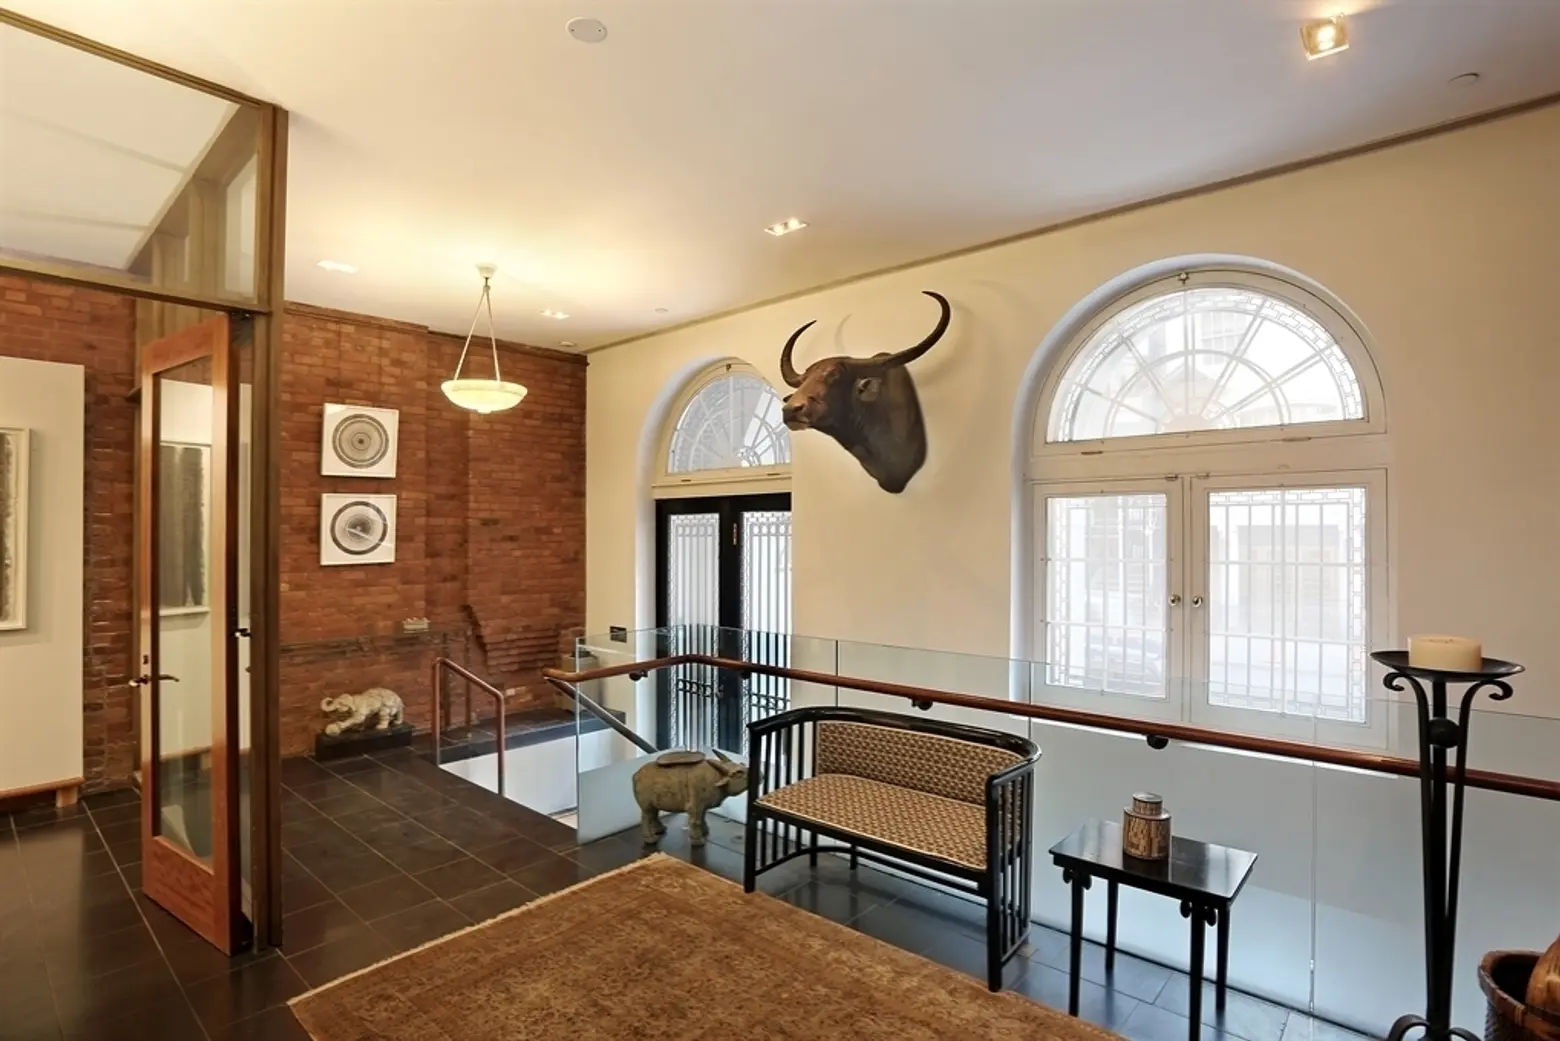 49 East 68th Street, Abby Leigh, landmarked townhome, ground-floor round-arched arcade